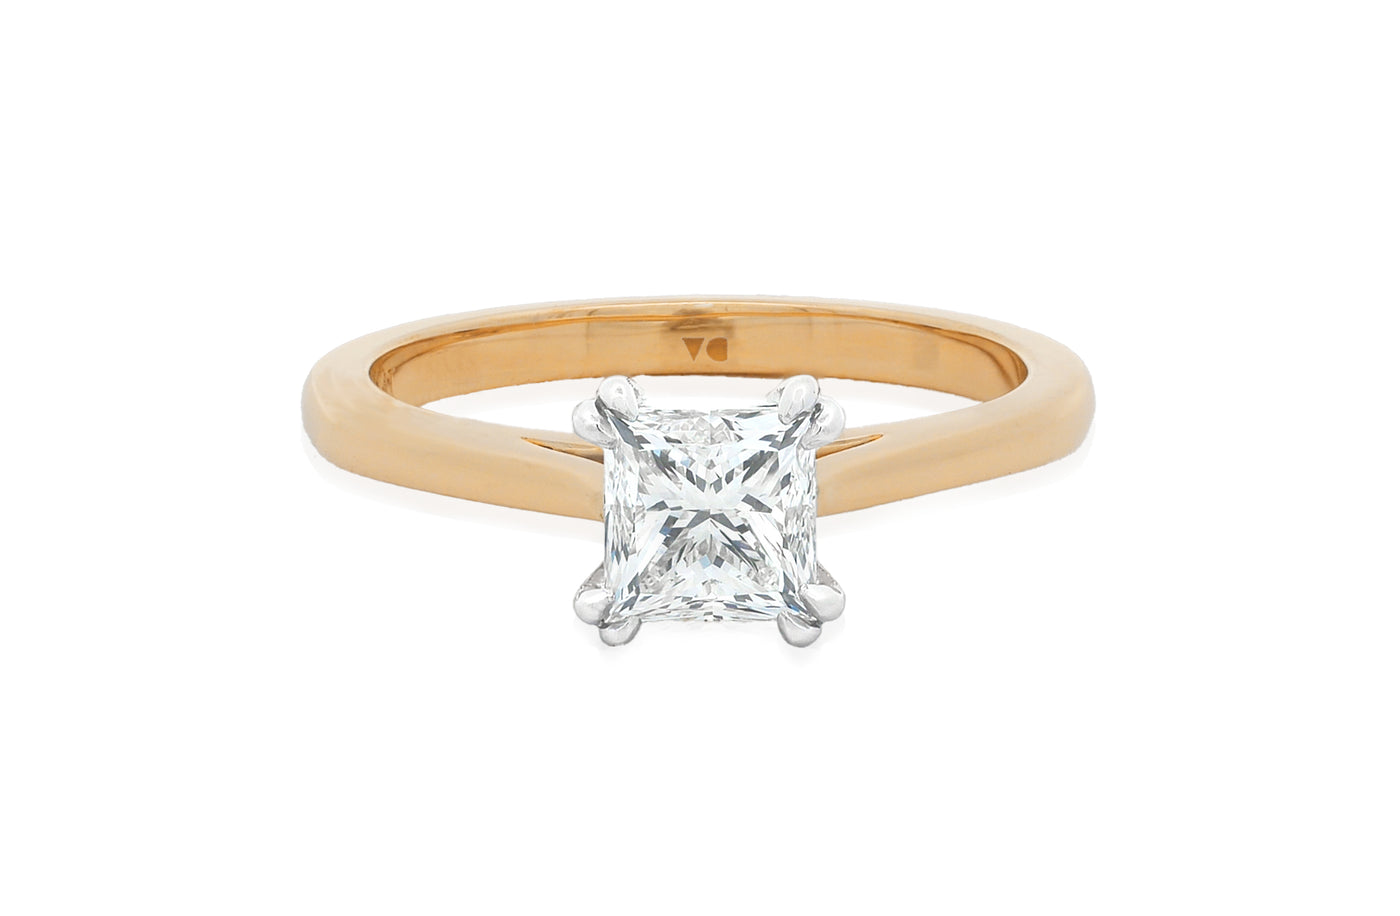 Alice: Princess Cut Diamond Solitaire Ring in 18ct Rose Gold